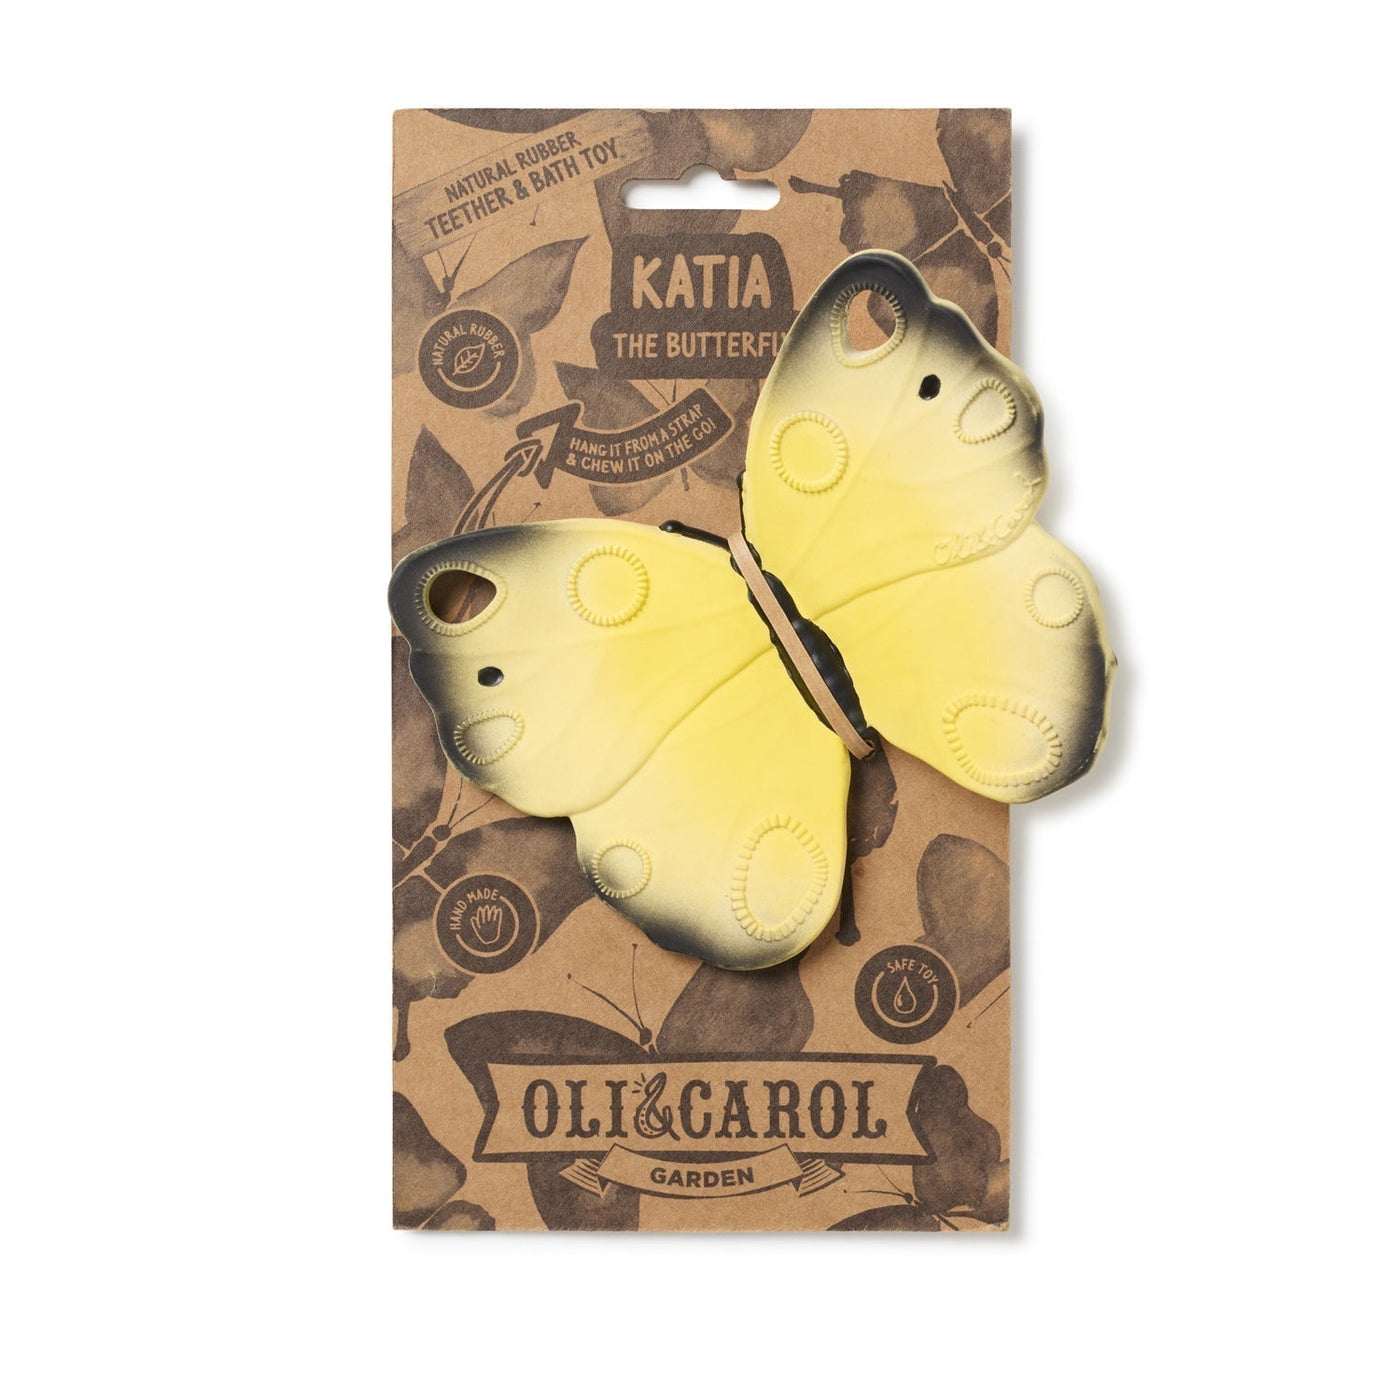 Oli and Carol Katia The Butterfly-Kids-Ohh! By Gum - Shop Sustainable